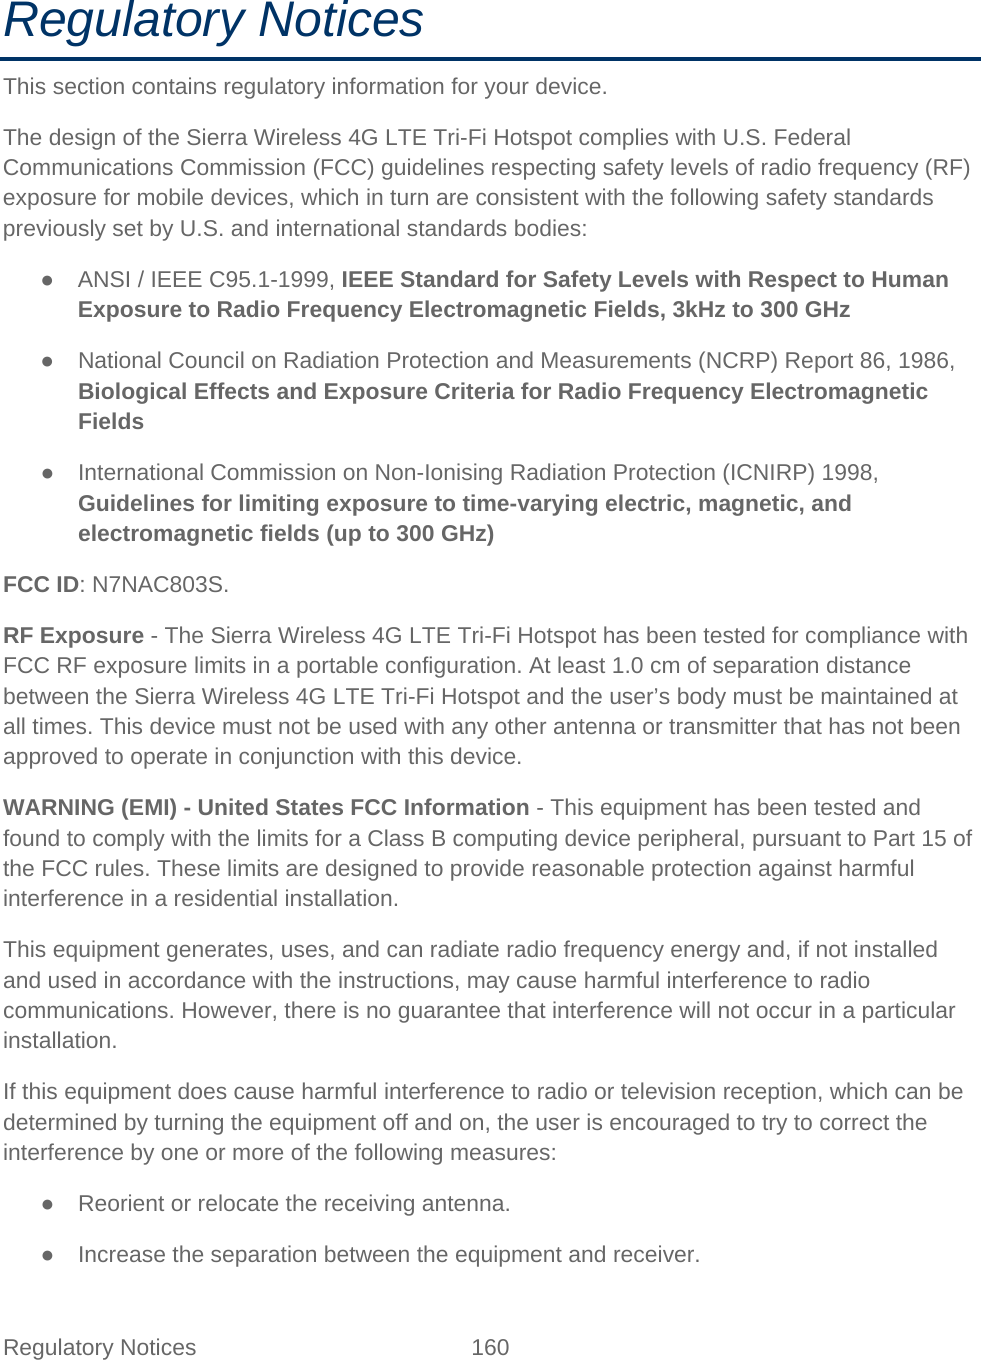 Regulatory Notices 160   Regulatory Notices This section contains regulatory information for your device. The design of the Sierra Wireless 4G LTE Tri-Fi Hotspot complies with U.S. Federal Communications Commission (FCC) guidelines respecting safety levels of radio frequency (RF) exposure for mobile devices, which in turn are consistent with the following safety standards previously set by U.S. and international standards bodies: ● ANSI / IEEE C95.1-1999, IEEE Standard for Safety Levels with Respect to Human Exposure to Radio Frequency Electromagnetic Fields, 3kHz to 300 GHz ● National Council on Radiation Protection and Measurements (NCRP) Report 86, 1986, Biological Effects and Exposure Criteria for Radio Frequency Electromagnetic Fields ● International Commission on Non-Ionising Radiation Protection (ICNIRP) 1998, Guidelines for limiting exposure to time-varying electric, magnetic, and electromagnetic fields (up to 300 GHz) FCC ID: N7NAC803S. RF Exposure - The Sierra Wireless 4G LTE Tri-Fi Hotspot has been tested for compliance with FCC RF exposure limits in a portable configuration. At least 1.0 cm of separation distance between the Sierra Wireless 4G LTE Tri-Fi Hotspot and the user’s body must be maintained at all times. This device must not be used with any other antenna or transmitter that has not been approved to operate in conjunction with this device. WARNING (EMI) - United States FCC Information - This equipment has been tested and found to comply with the limits for a Class B computing device peripheral, pursuant to Part 15 of the FCC rules. These limits are designed to provide reasonable protection against harmful interference in a residential installation. This equipment generates, uses, and can radiate radio frequency energy and, if not installed and used in accordance with the instructions, may cause harmful interference to radio communications. However, there is no guarantee that interference will not occur in a particular installation. If this equipment does cause harmful interference to radio or television reception, which can be determined by turning the equipment off and on, the user is encouraged to try to correct the interference by one or more of the following measures: ● Reorient or relocate the receiving antenna. ● Increase the separation between the equipment and receiver. 